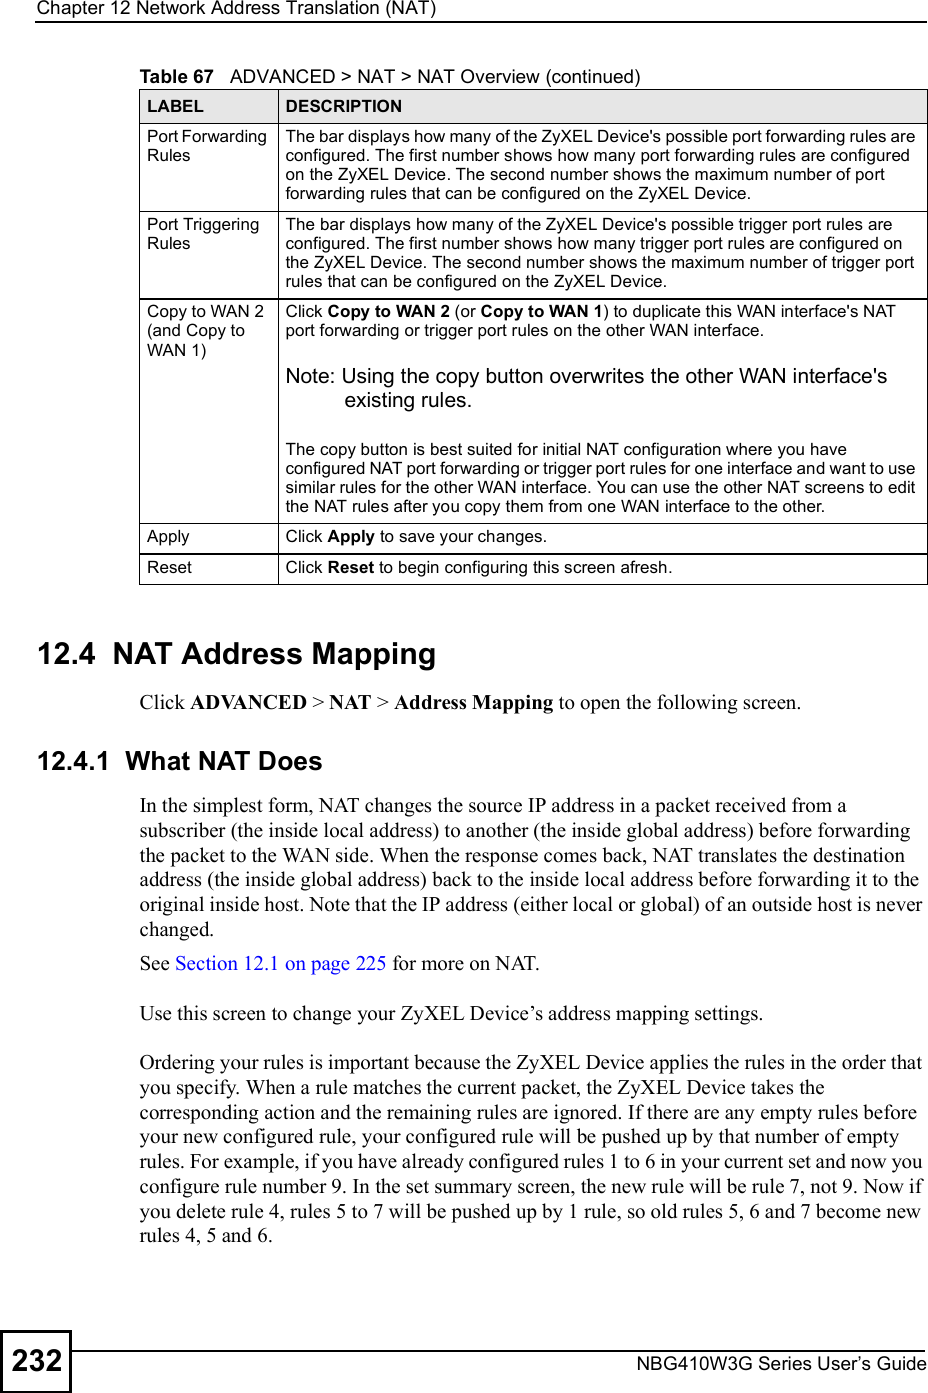 Chapter 12Network Address Translation (NAT)NBG410W3G Series User s Guide23212.4  NAT Address Mapping   Click ADVANCED &gt; NAT &gt; Address Mapping to open the following screen. 12.4.1  What NAT DoesIn the simplest form, NAT changes the source IP address in a packet received from a subscriber (the inside local address) to another (the inside global address) before forwarding the packet to the WAN side. When the response comes back, NAT translates the destination address (the inside global address) back to the inside local address before forwarding it to the original inside host. Note that the IP address (either local or global) of an outside host is never changed.See Section 12.1 on page 225 for more on NAT.Use this screen to change your ZyXEL Device!s address mapping settings.  Ordering your rules is important because the ZyXEL Device applies the rules in the order that you specify. When a rule matches the current packet, the ZyXEL Device takes the corresponding action and the remaining rules are ignored. If there are any empty rules before your new configured rule, your configured rule will be pushed up by that number of empty rules. For example, if you have already configured rules 1 to 6 in your current set and now you configure rule number 9. In the set summary screen, the new rule will be rule 7, not 9. Now if you delete rule 4, rules 5 to 7 will be pushed up by 1 rule, so old rules 5, 6 and 7 become new rules 4, 5 and 6. Port Forwarding RulesThe bar displays how many of the ZyXEL Device&apos;s possible port forwarding rules are configured. The first number shows how many port forwarding rules are configured on the ZyXEL Device. The second number shows the maximum number of port forwarding rules that can be configured on the ZyXEL Device.Port Triggering RulesThe bar displays how many of the ZyXEL Device&apos;s possible trigger port rules are configured. The first number shows how many trigger port rules are configured on the ZyXEL Device. The second number shows the maximum number of trigger port rules that can be configured on the ZyXEL Device.Copy to WAN 2 (and Copy to WAN 1)Click Copy to WAN 2 (or Copy to WAN 1) to duplicate this WAN interface&apos;s NAT port forwarding or trigger port rules on the other WAN interface.Note: Using the copy button overwrites the other WAN interface&apos;s existing rules.The copy button is best suited for initial NAT configuration where you have configured NAT port forwarding or trigger port rules for one interface and want to use similar rules for the other WAN interface. You can use the other NAT screens to edit the NAT rules after you copy them from one WAN interface to the other.Apply Click Apply to save your changes.Reset Click Reset to begin configuring this screen afresh.Table 67   ADVANCED &gt; NAT &gt; NAT Overview (continued)LABEL DESCRIPTION